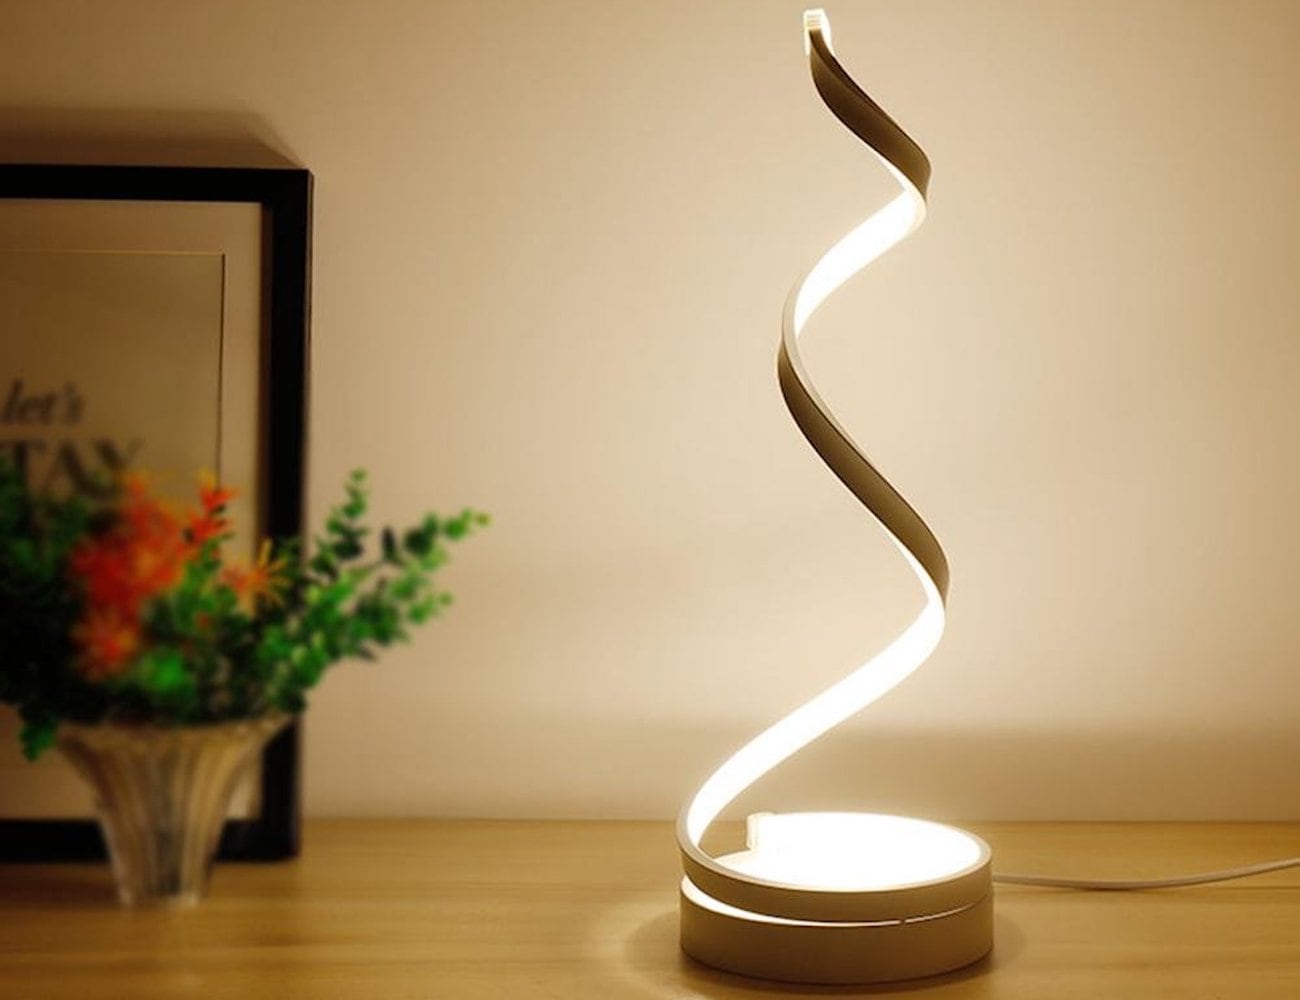 Helix Spiral Decor Lamp provides three different colors of light